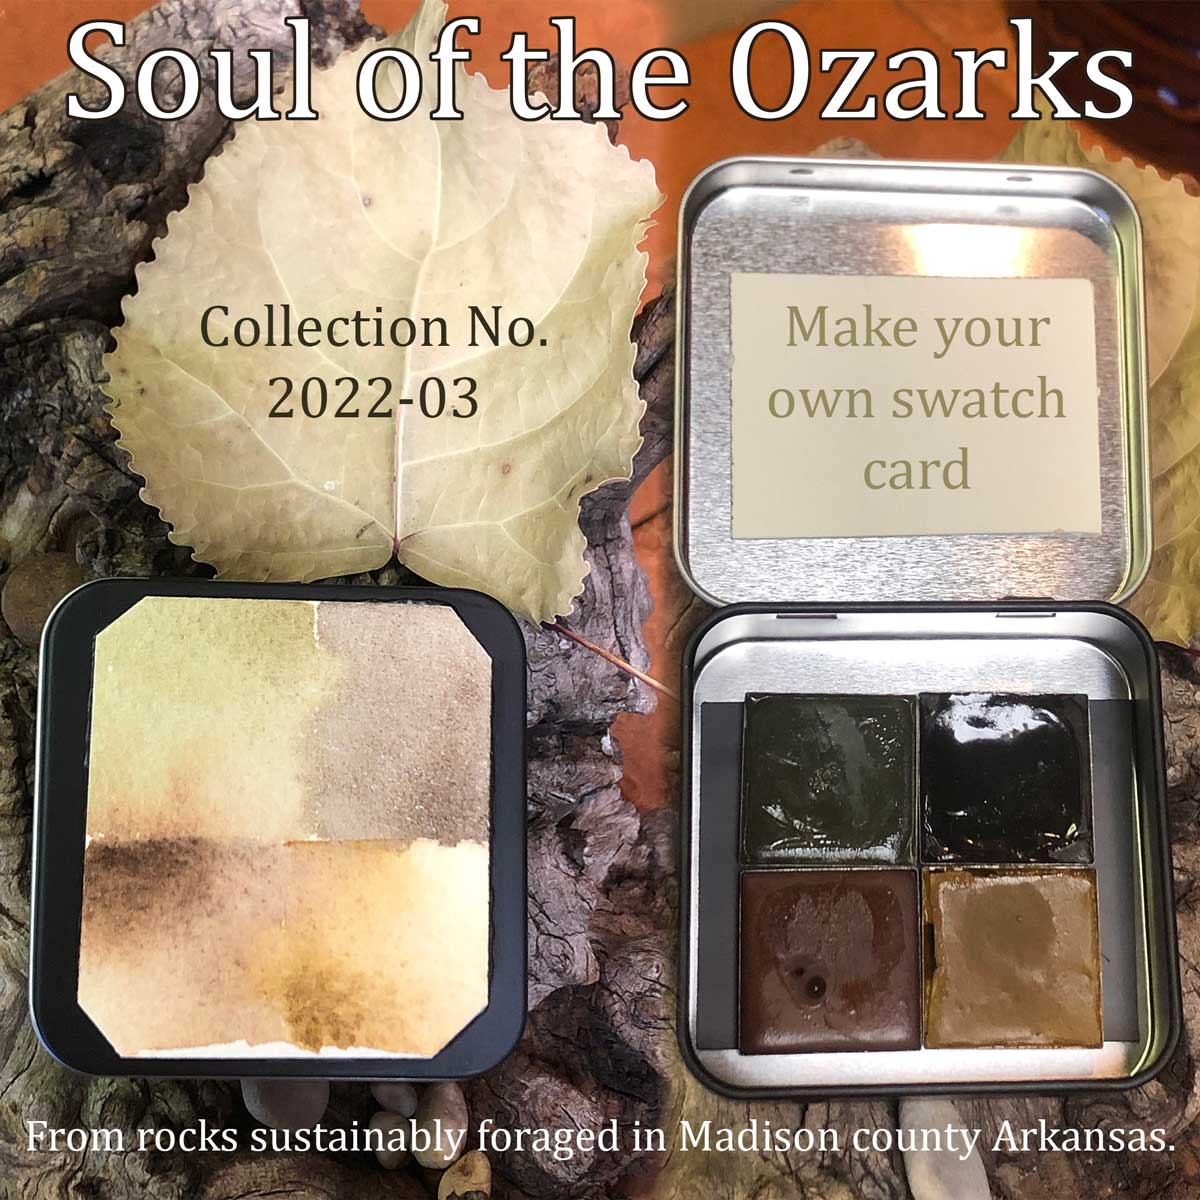 These handmade watercolor paints are about as OOAK as it gets. No two rocks are exactly alike, and even within batches made from larger rocks, there will still be variation.